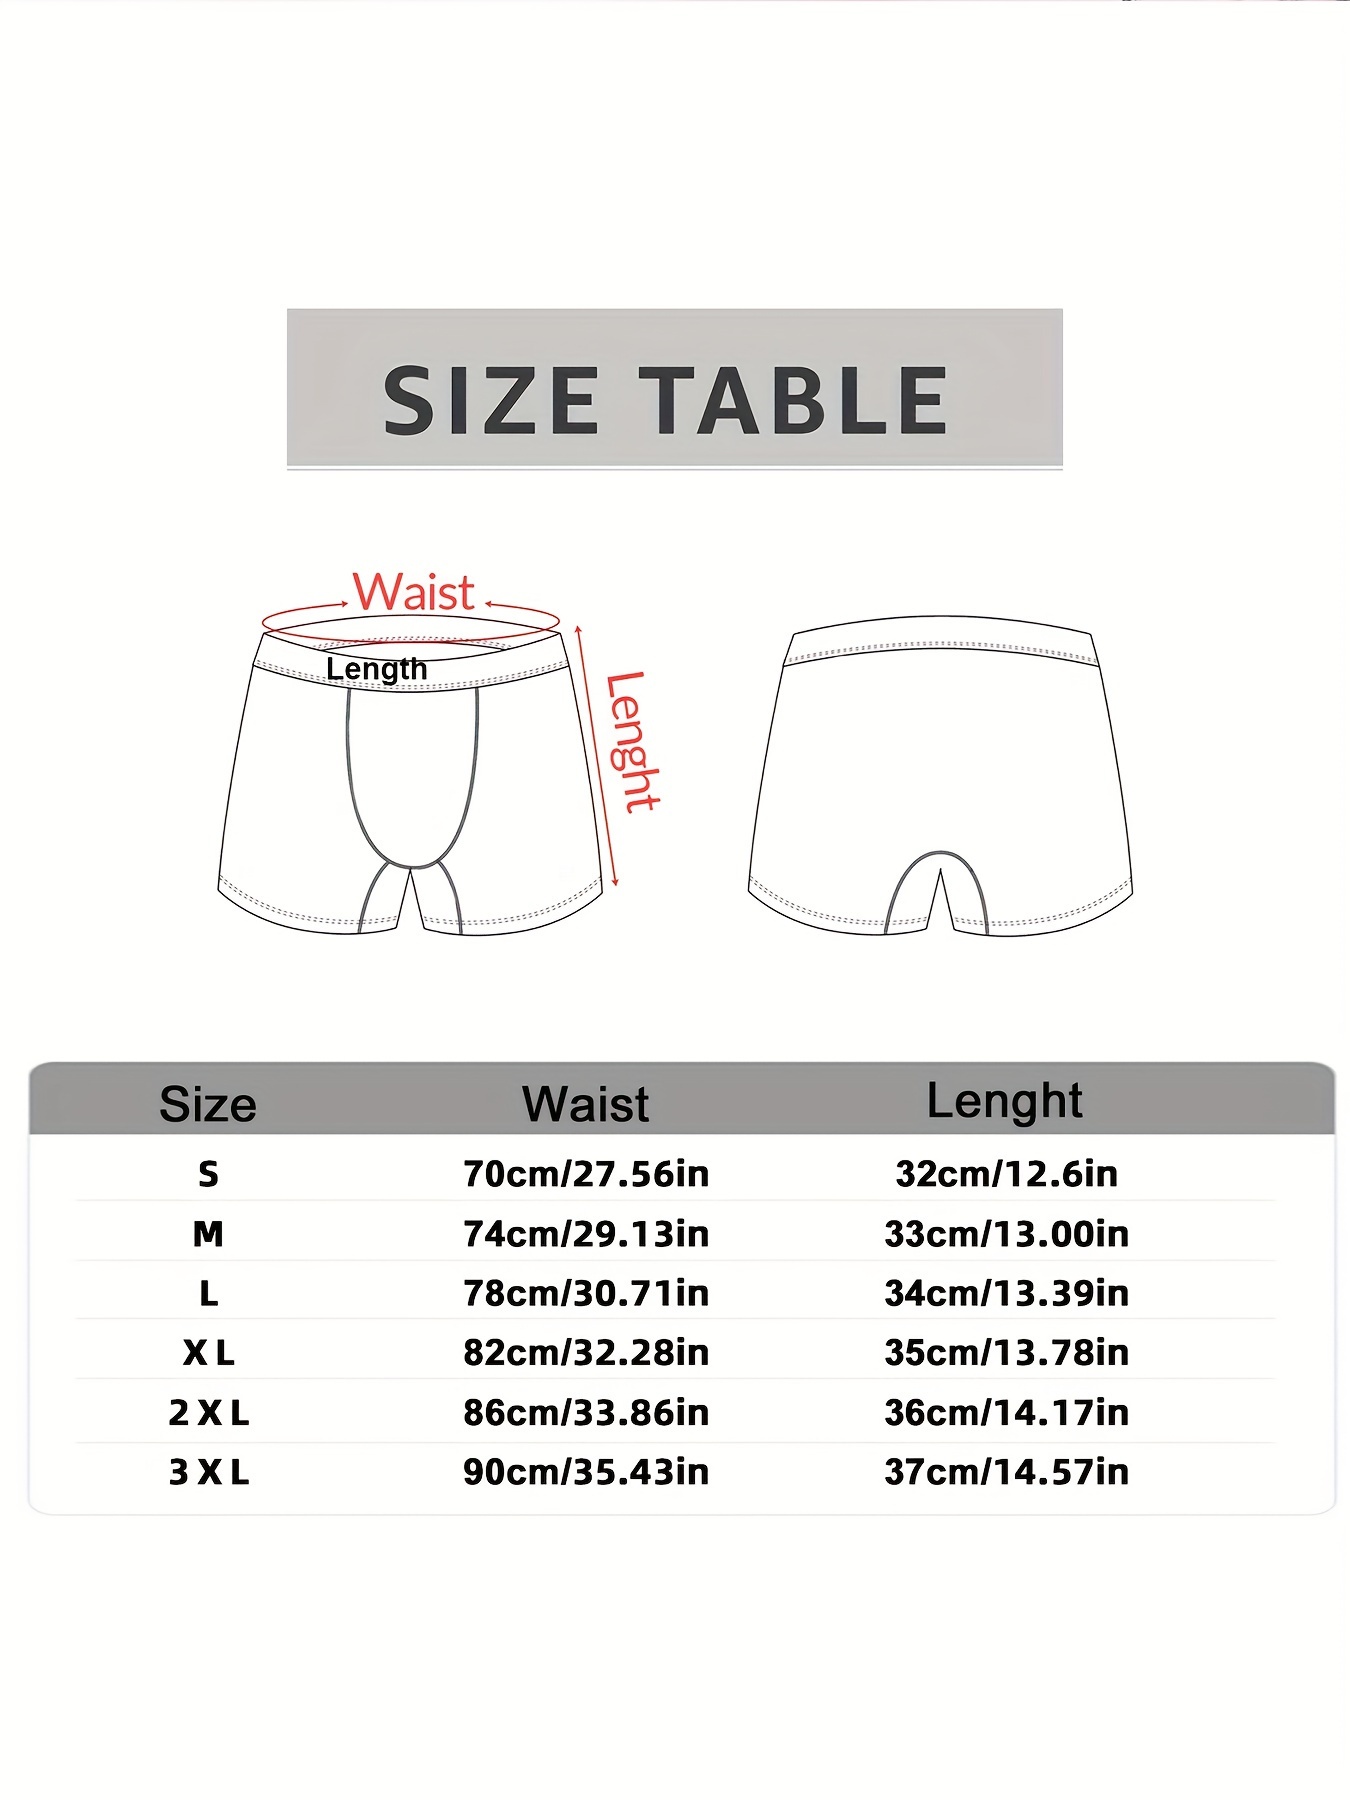 Mens personalised funny boxer shorts custom briefs : : Handmade  Products